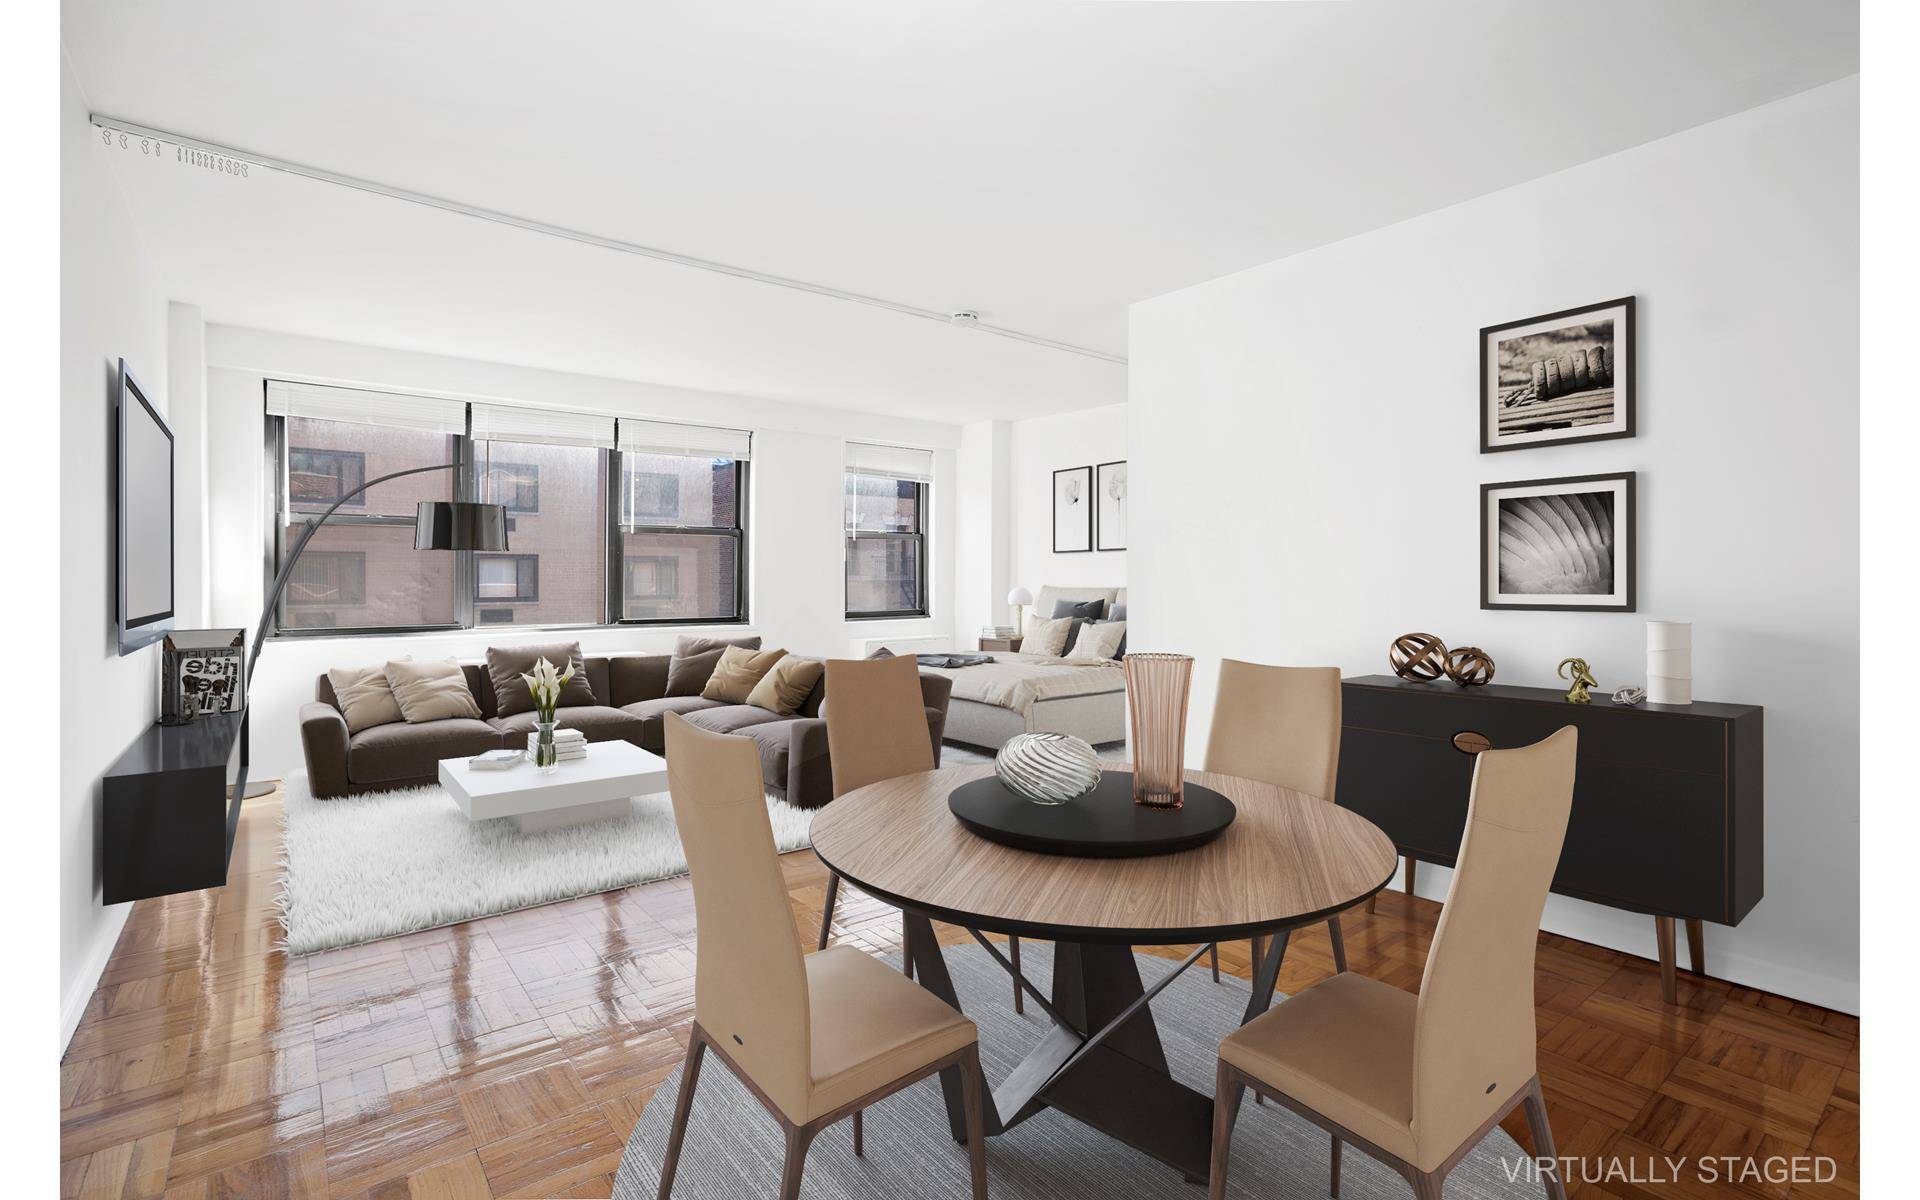 Spacious and Sunny East 20s Alcove Studio in a 24 Hour Doorman Building with 4 Front Facing Windows providing Natural Light and a View of the Empire State Building.